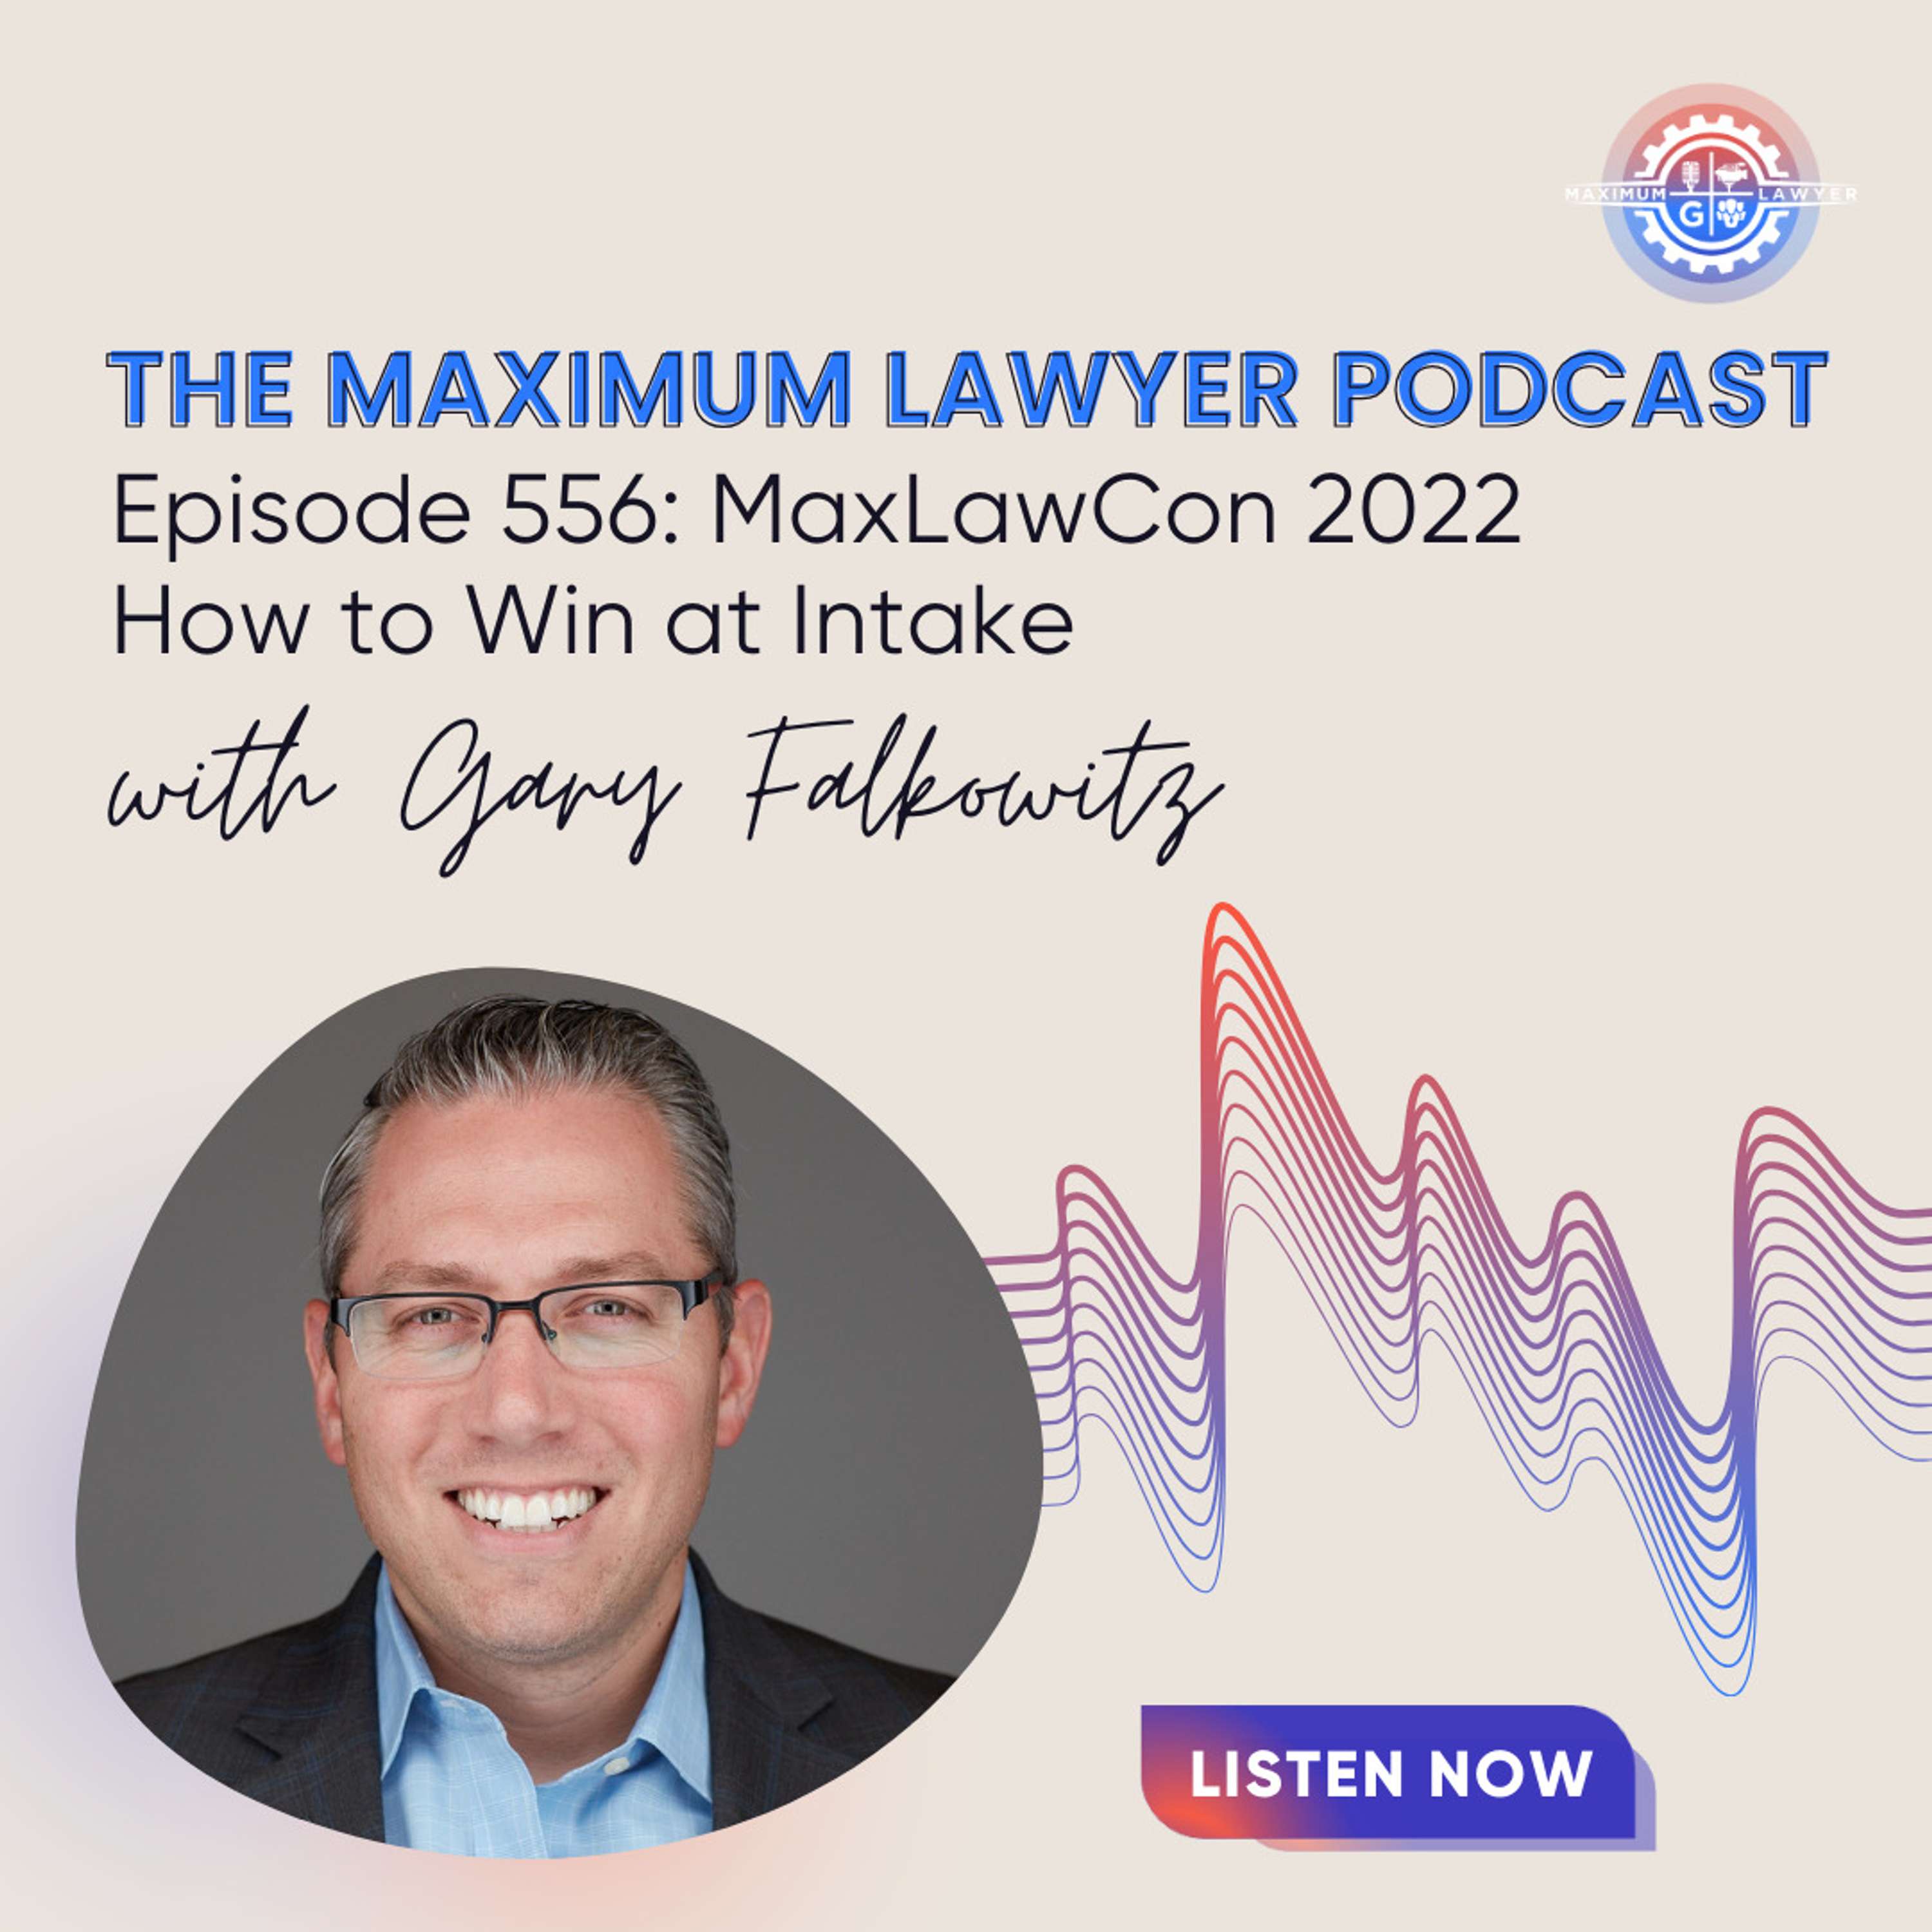 How to Win at Intake with Gary Falkowitz